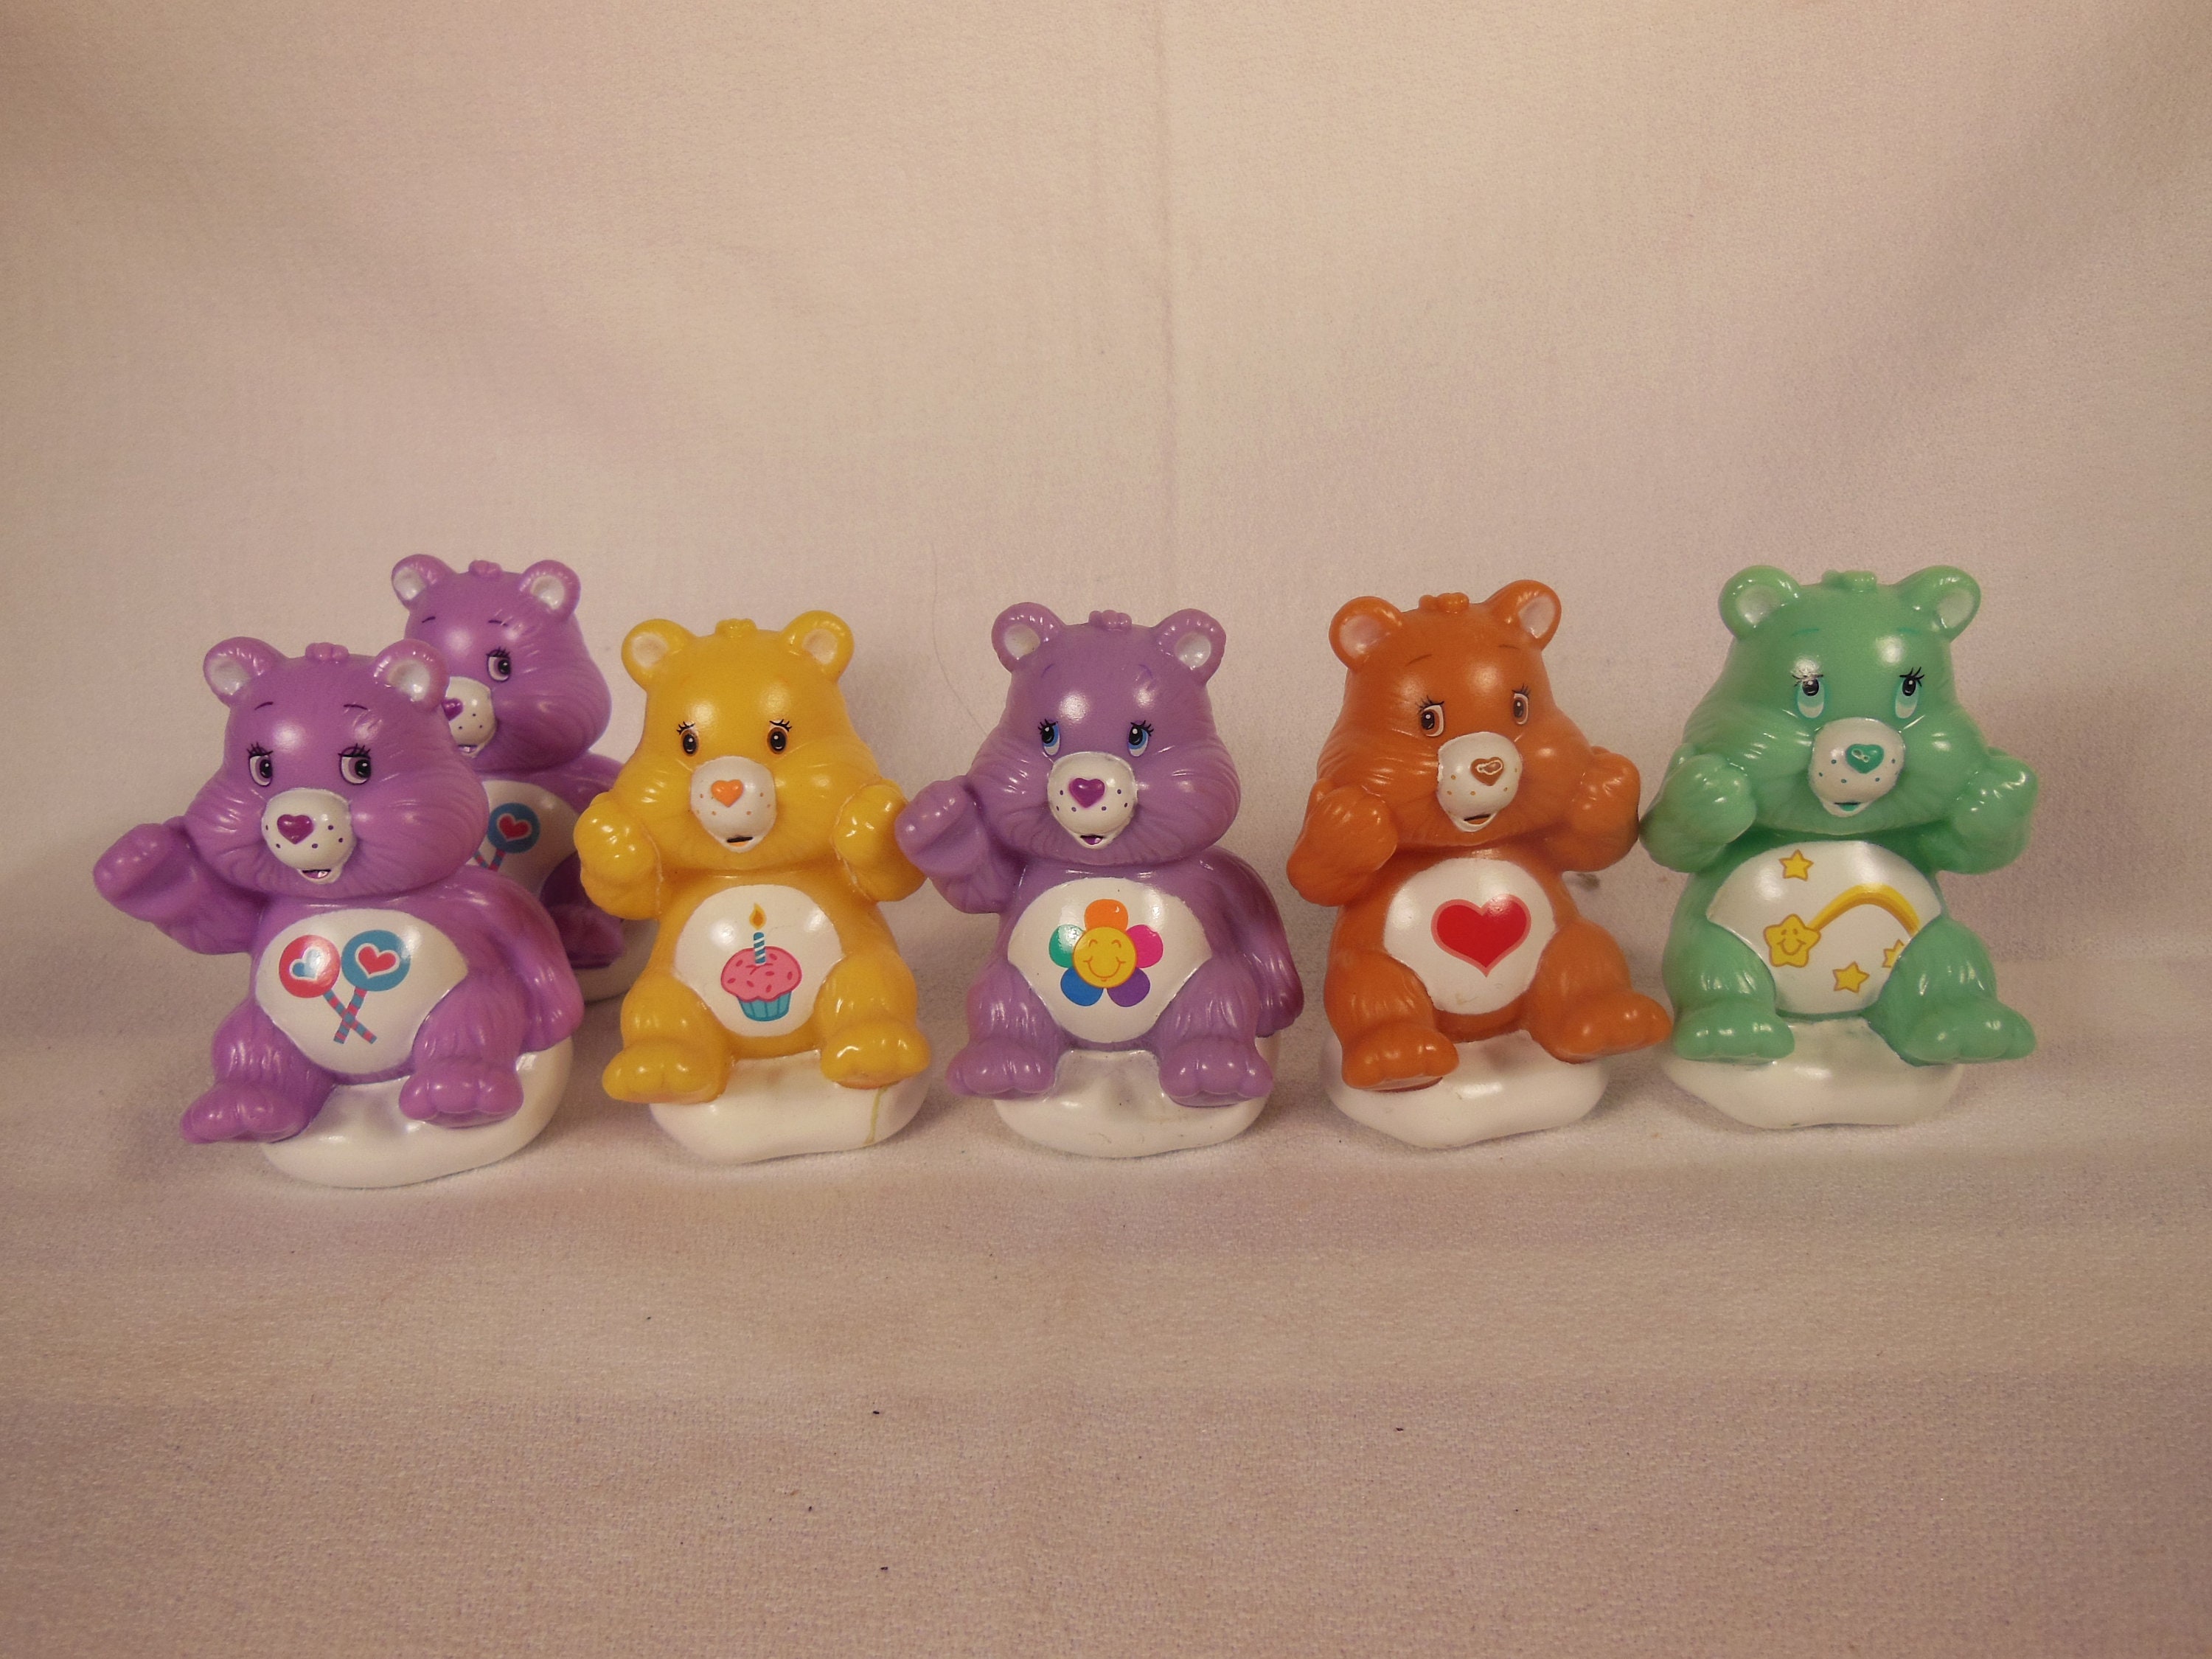 Set of 6 TCFC Vintage CARE BEARS Toy Figures PVC Cake Toppers Sitting on Cloud 